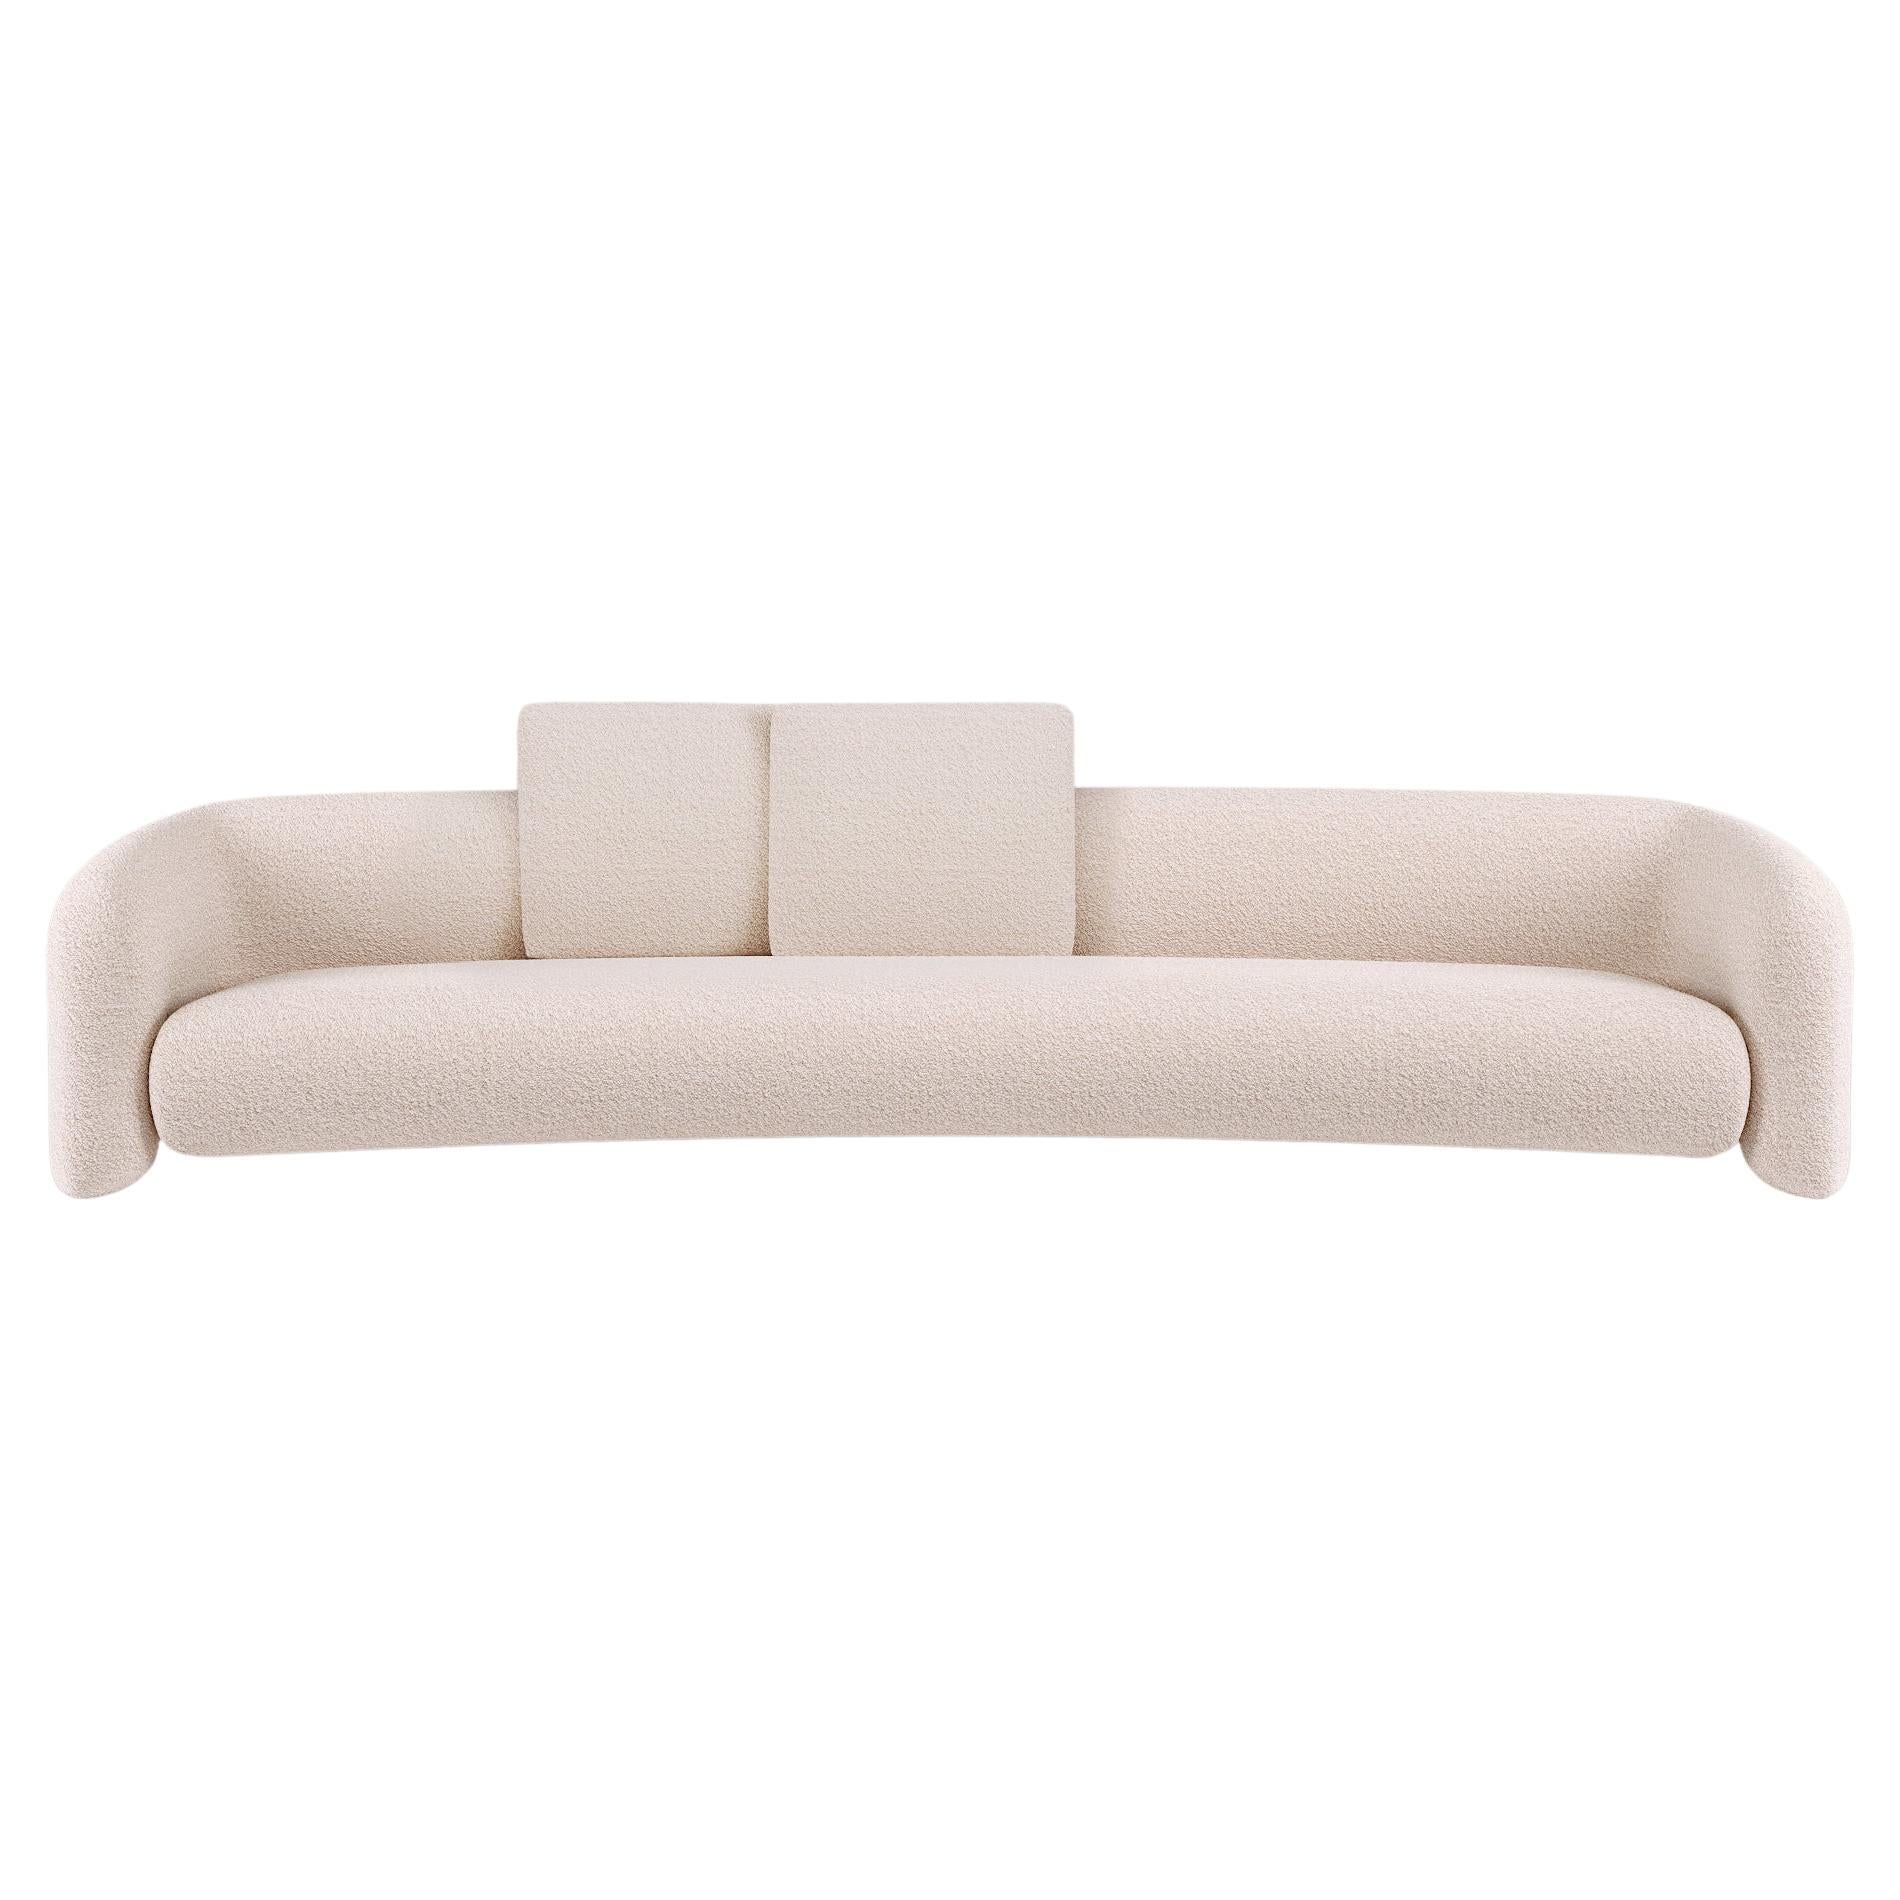 Bold Sofa Curved Open arms - S For Sale